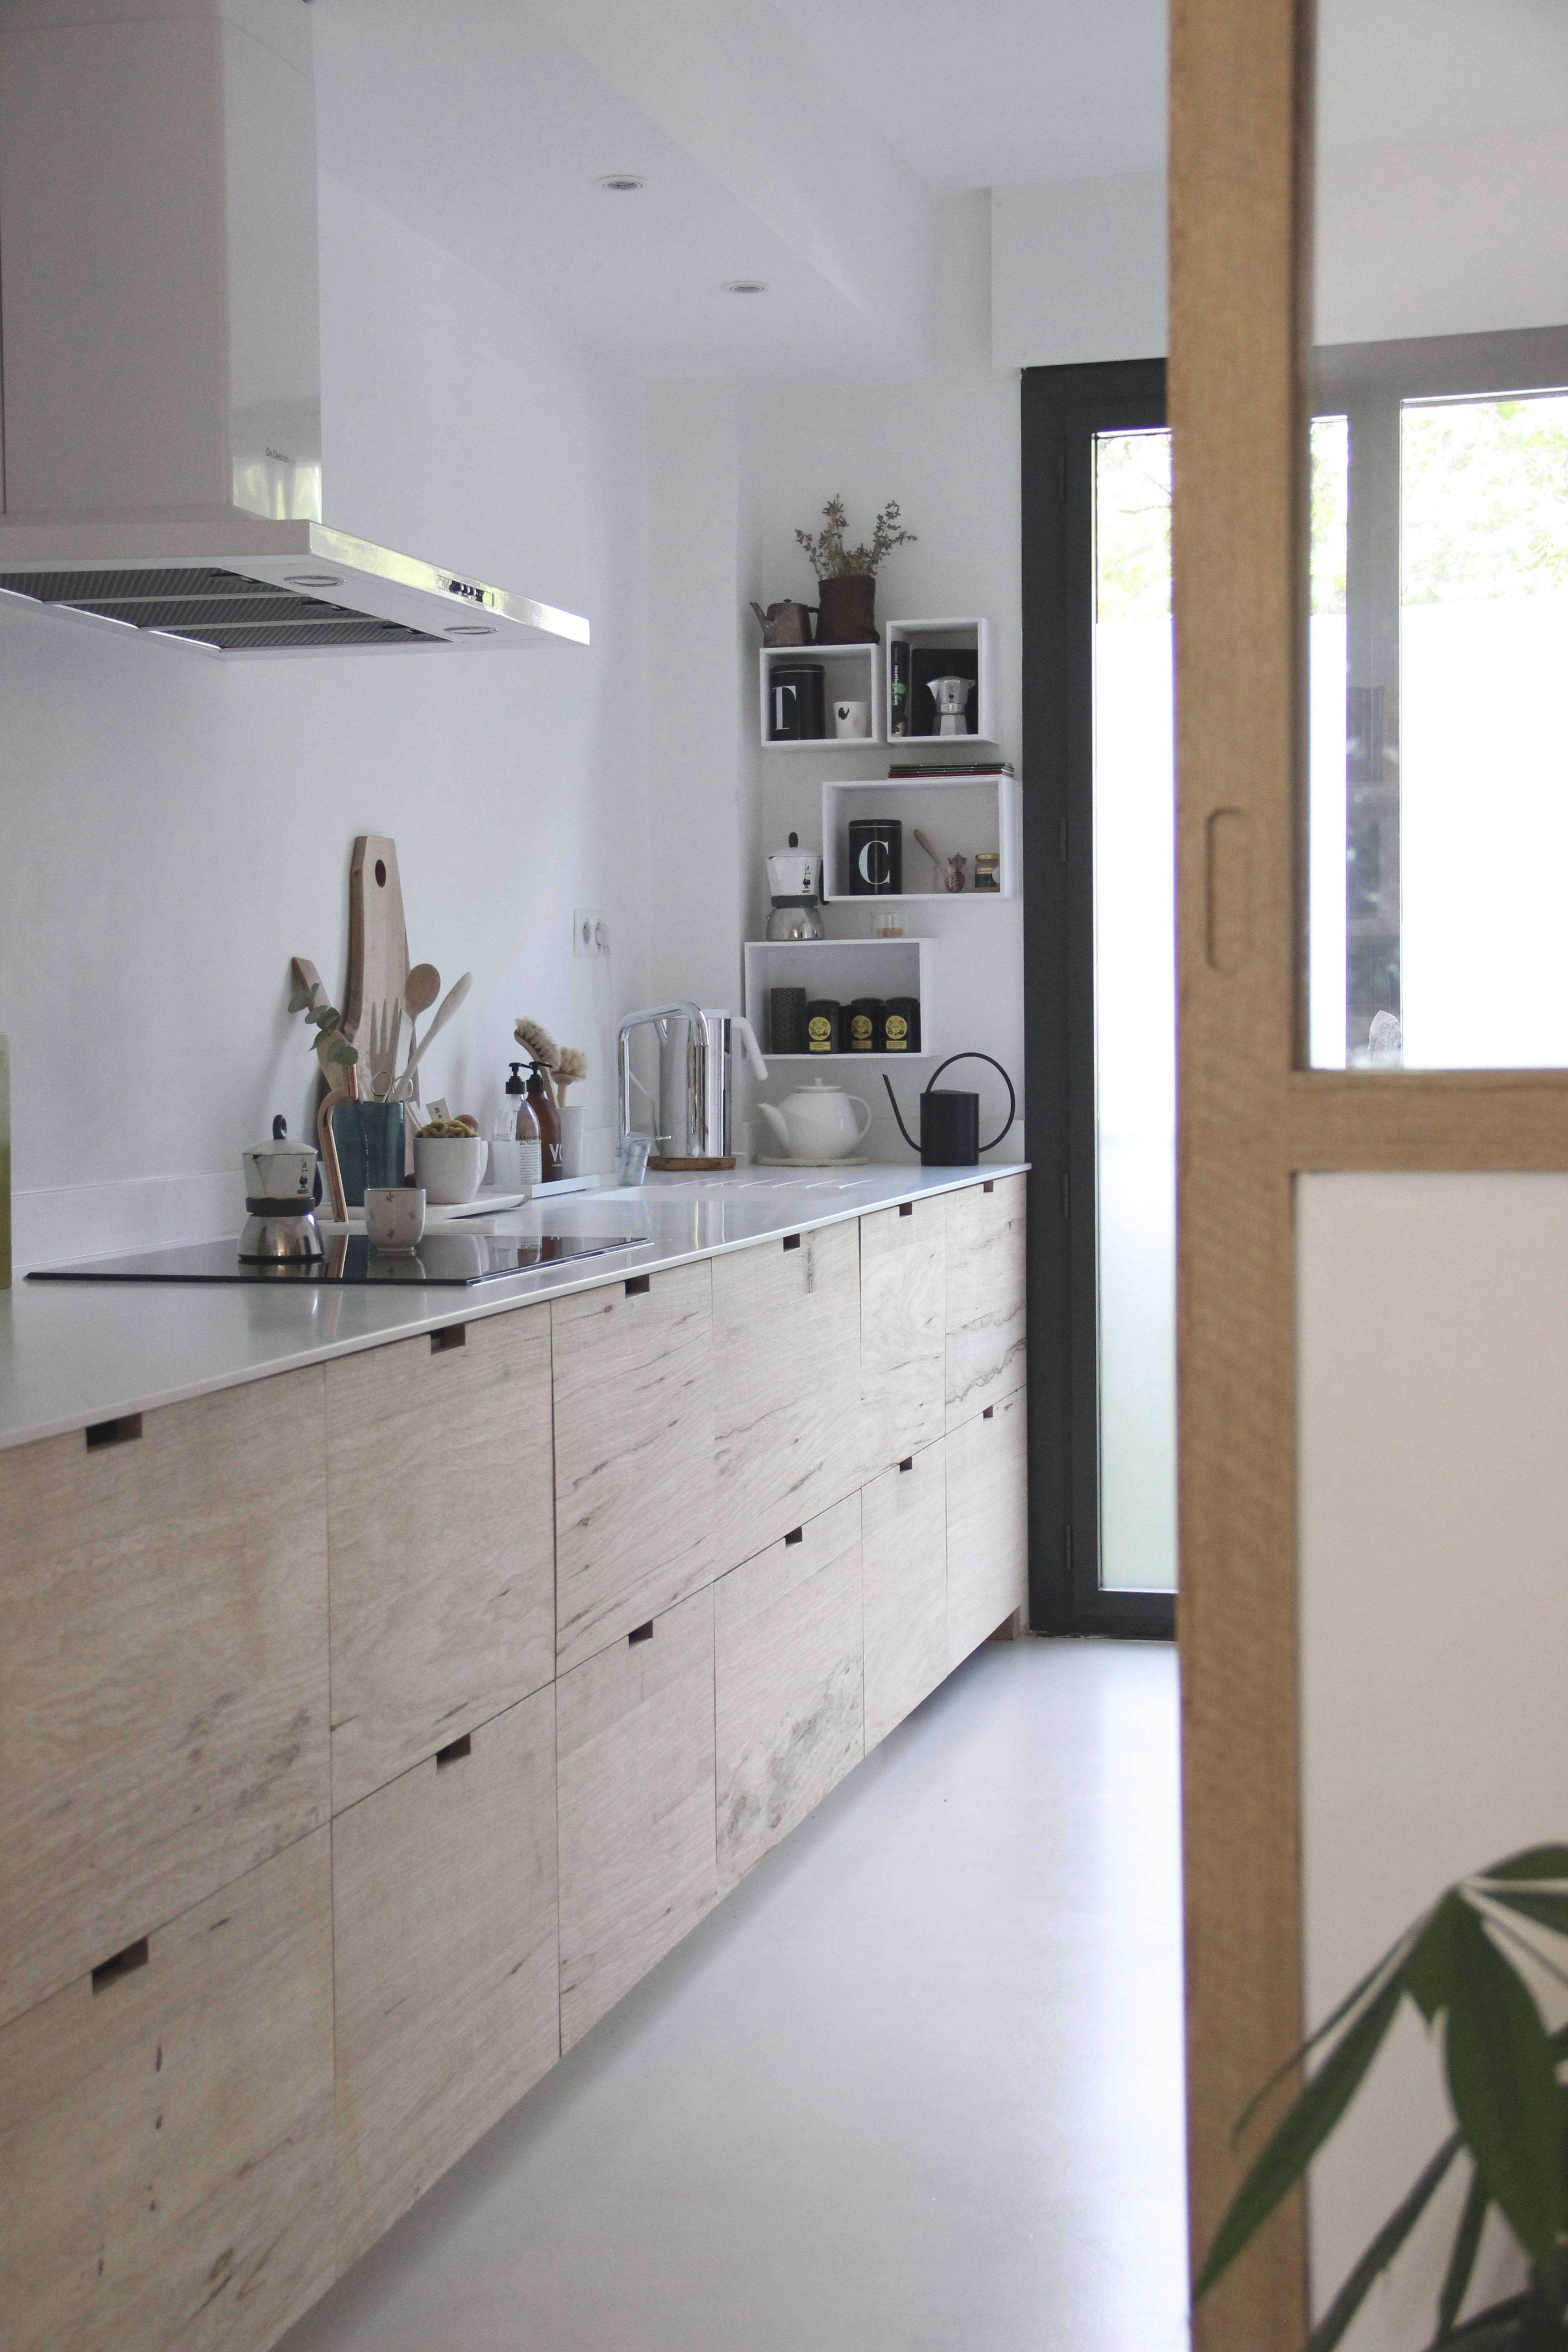 Before & After A Designer's Ikea Hack Kitchen in Provence